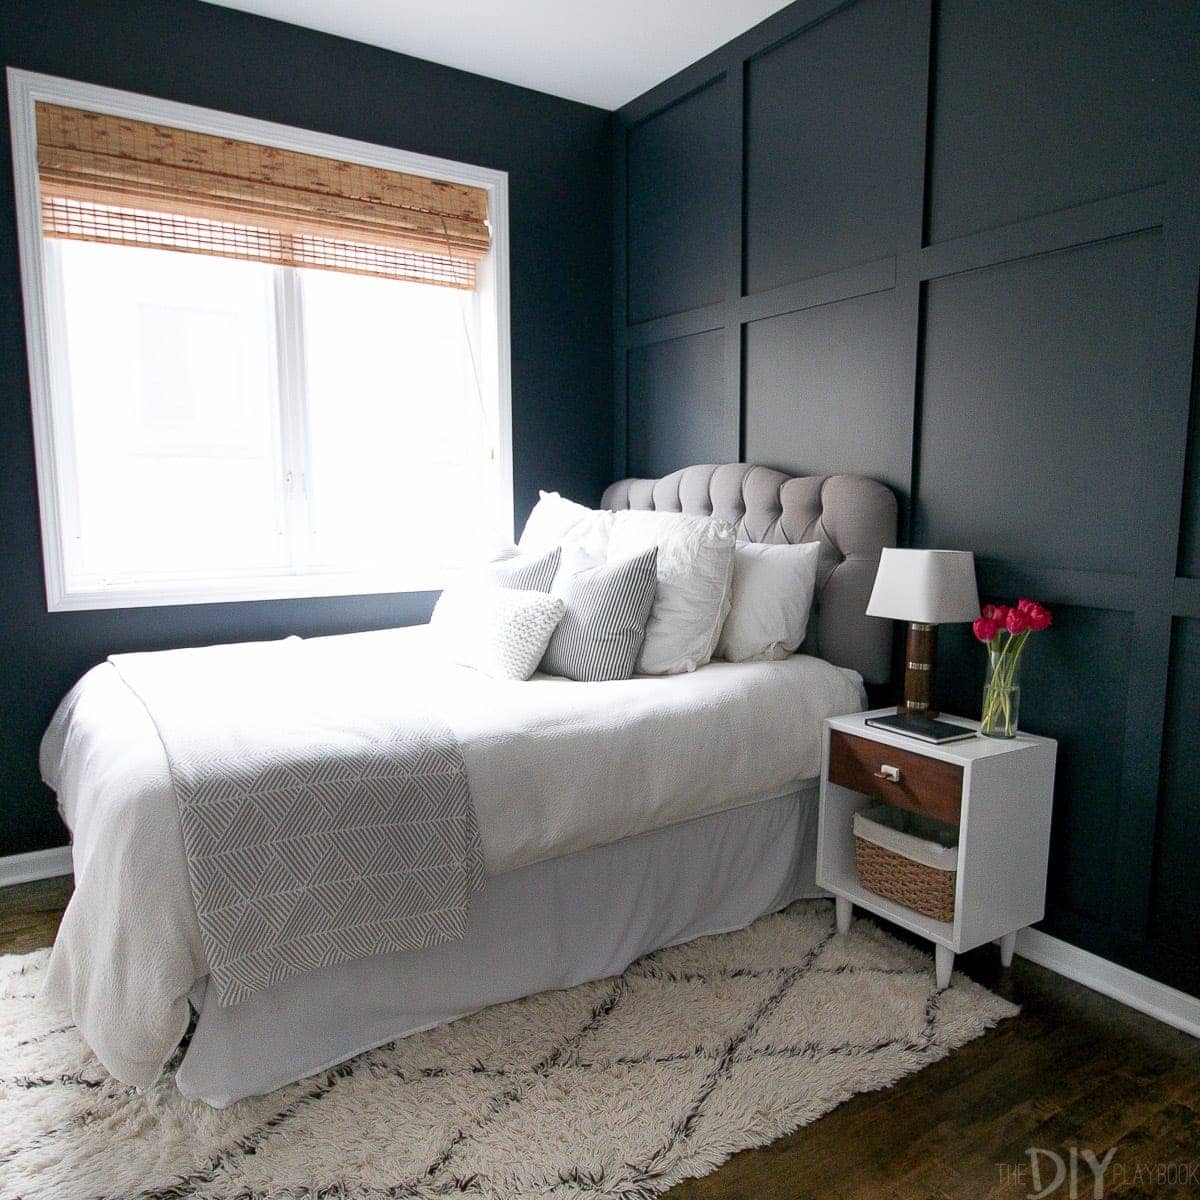 Add a wood wall treatment behind your bed